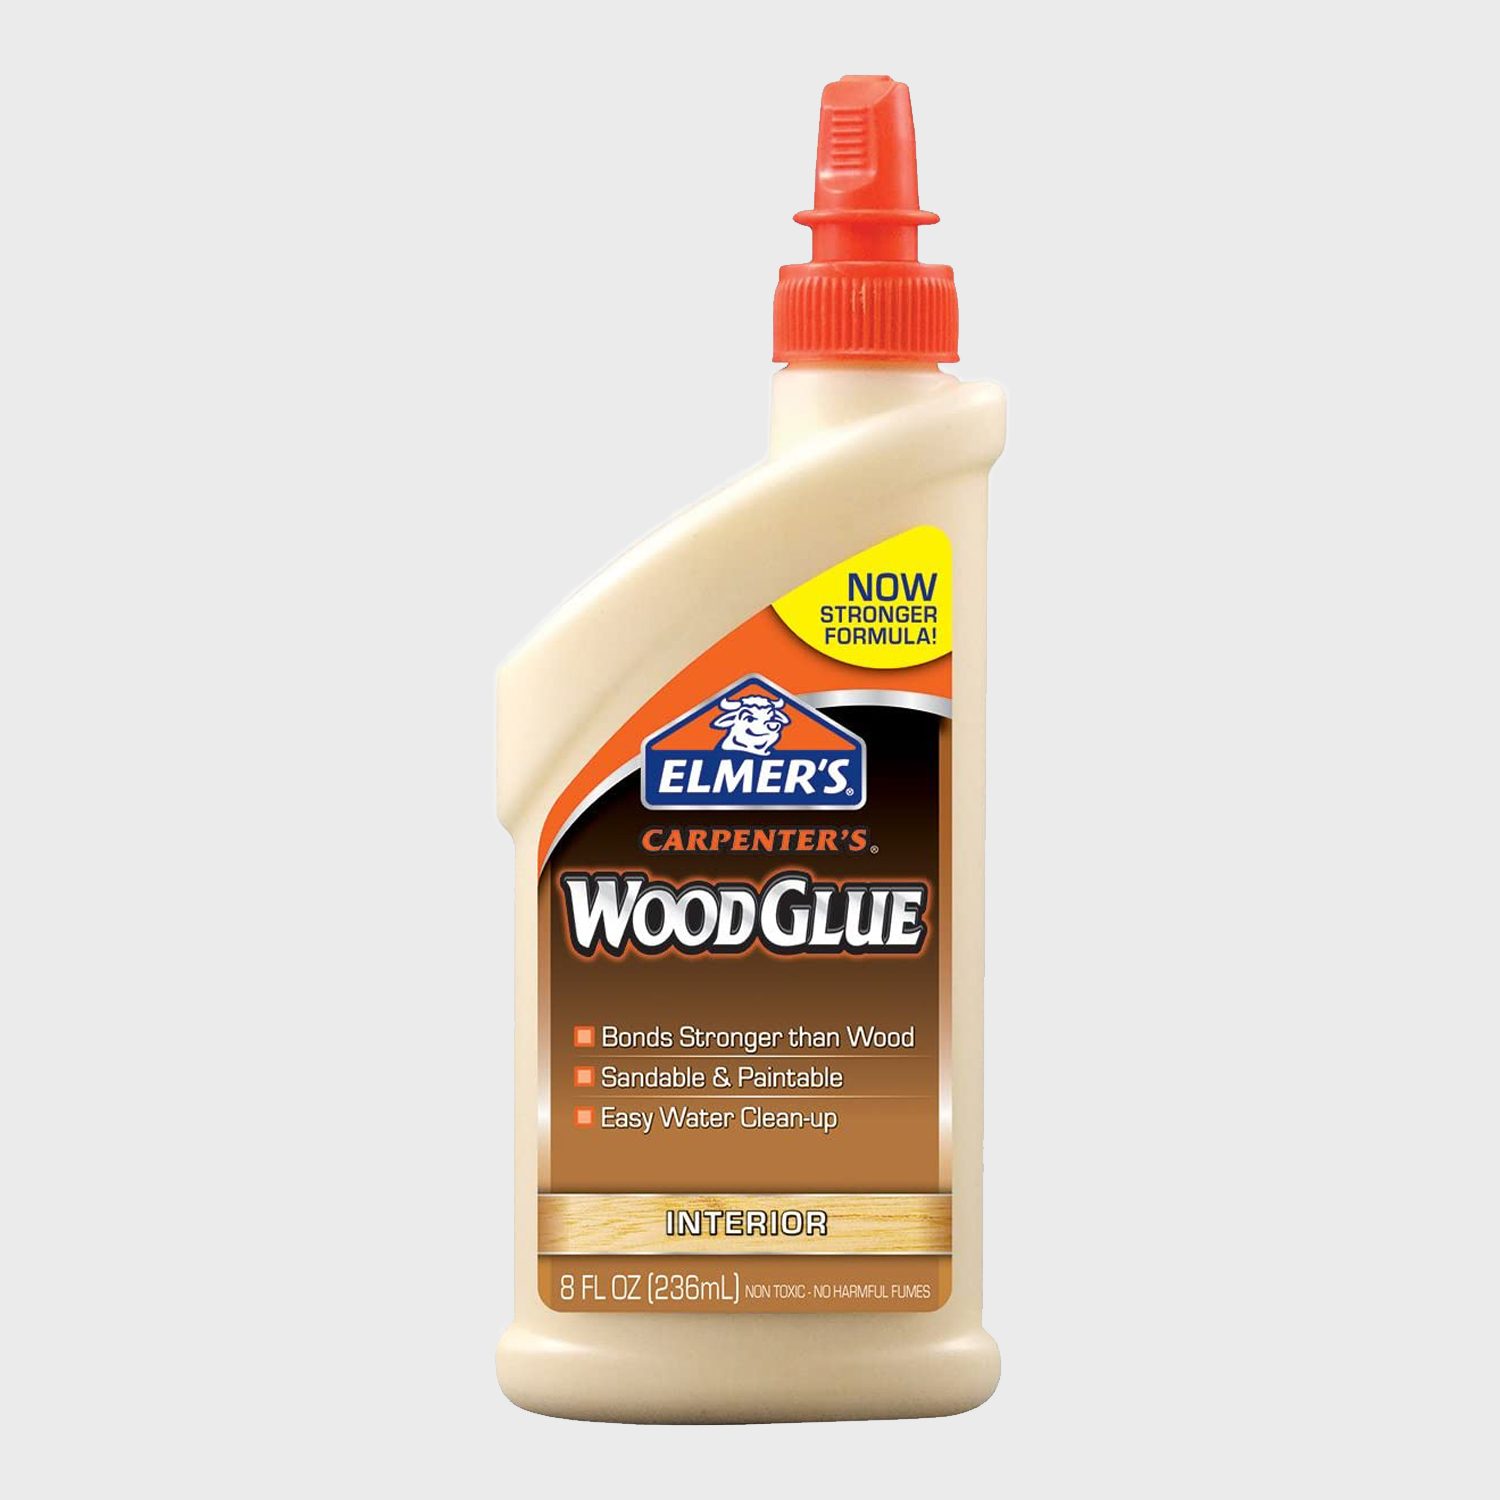 Which Is Stronger Wood Glue Or Construction Adhesive?